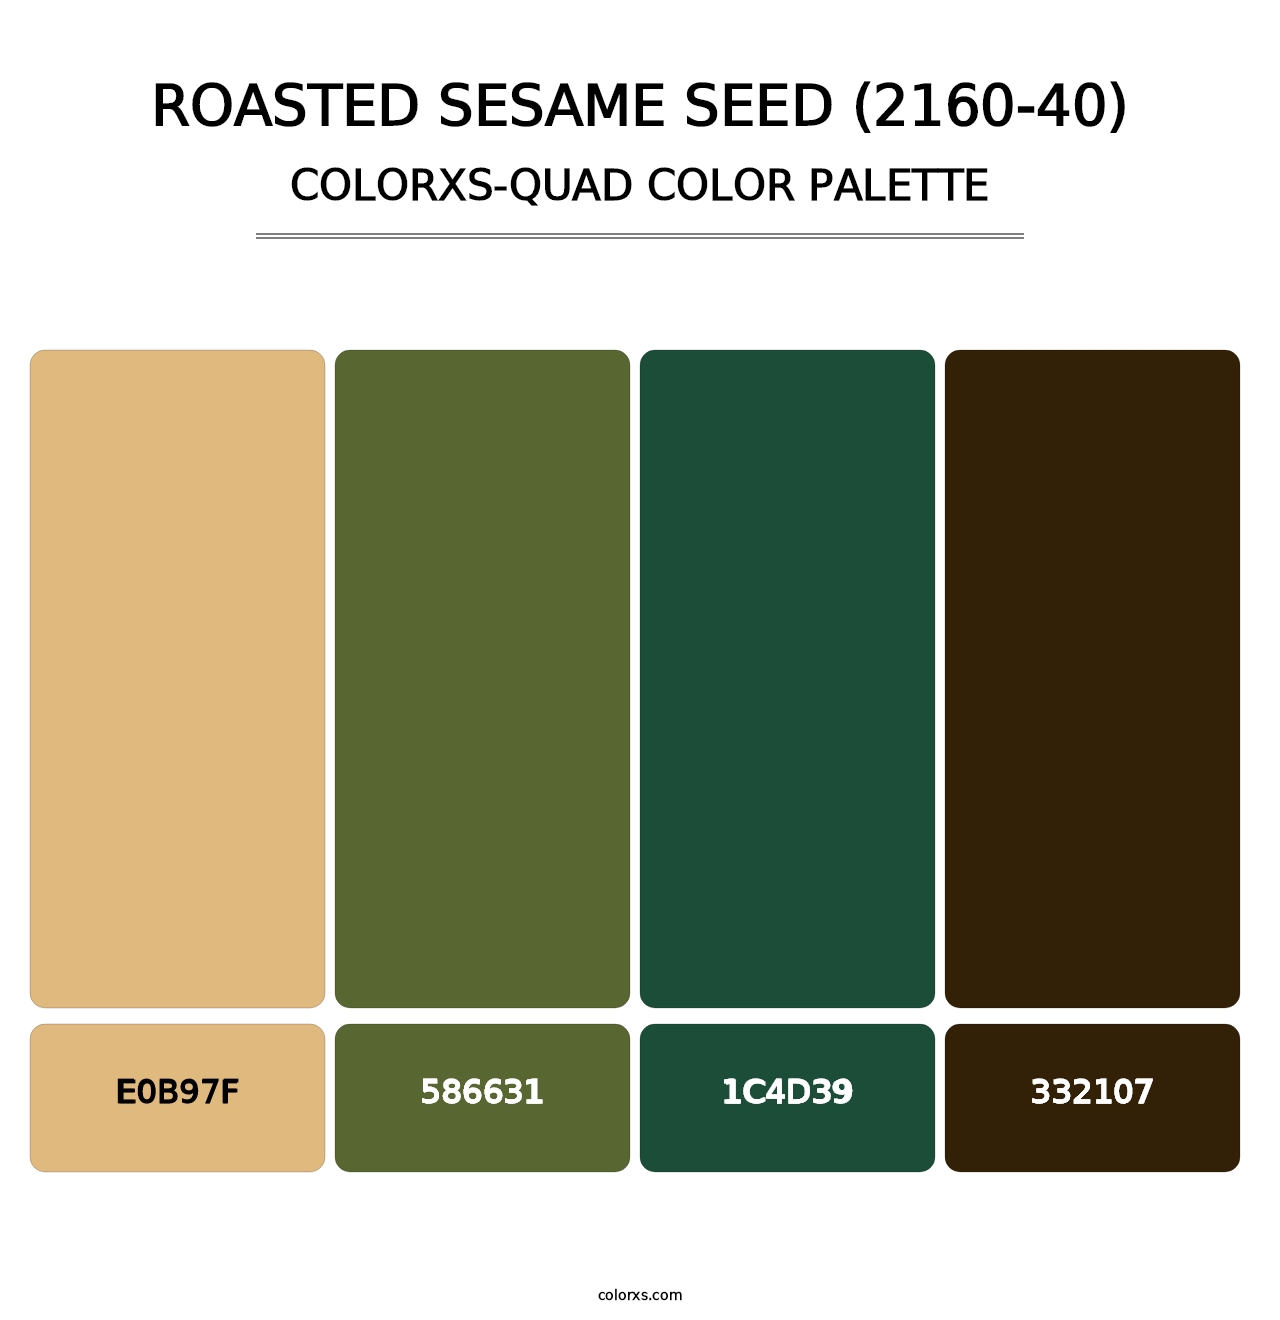 Roasted Sesame Seed (2160-40) - Colorxs Quad Palette